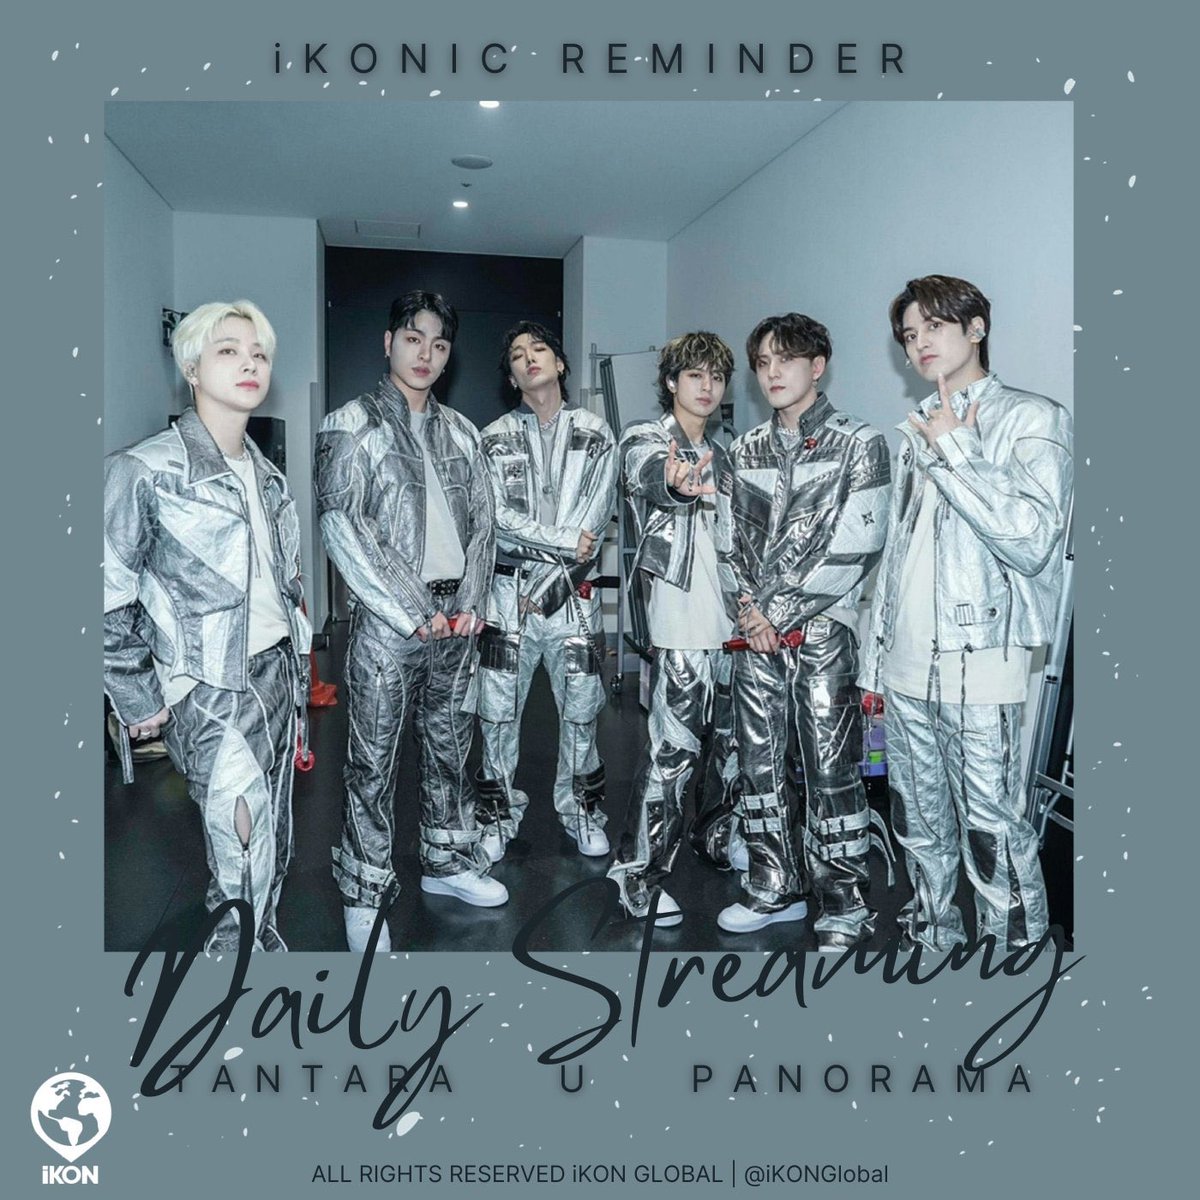 [🎞 DAILY STREAMING] iKONICS, let's start new this year with our latest music videos! Let's get it together! TANTARA: youtu.be/KRgbVo4OTKQ?si… U: youtu.be/f3wuMLWtUqQ?si… PANORAMA: youtu.be/DZMvTz5ixYo?si… #JAY #SONG #BOBBY #DK #JU_NE #CHAN #iKONIC #iKON #아이콘 @iKONIC_143